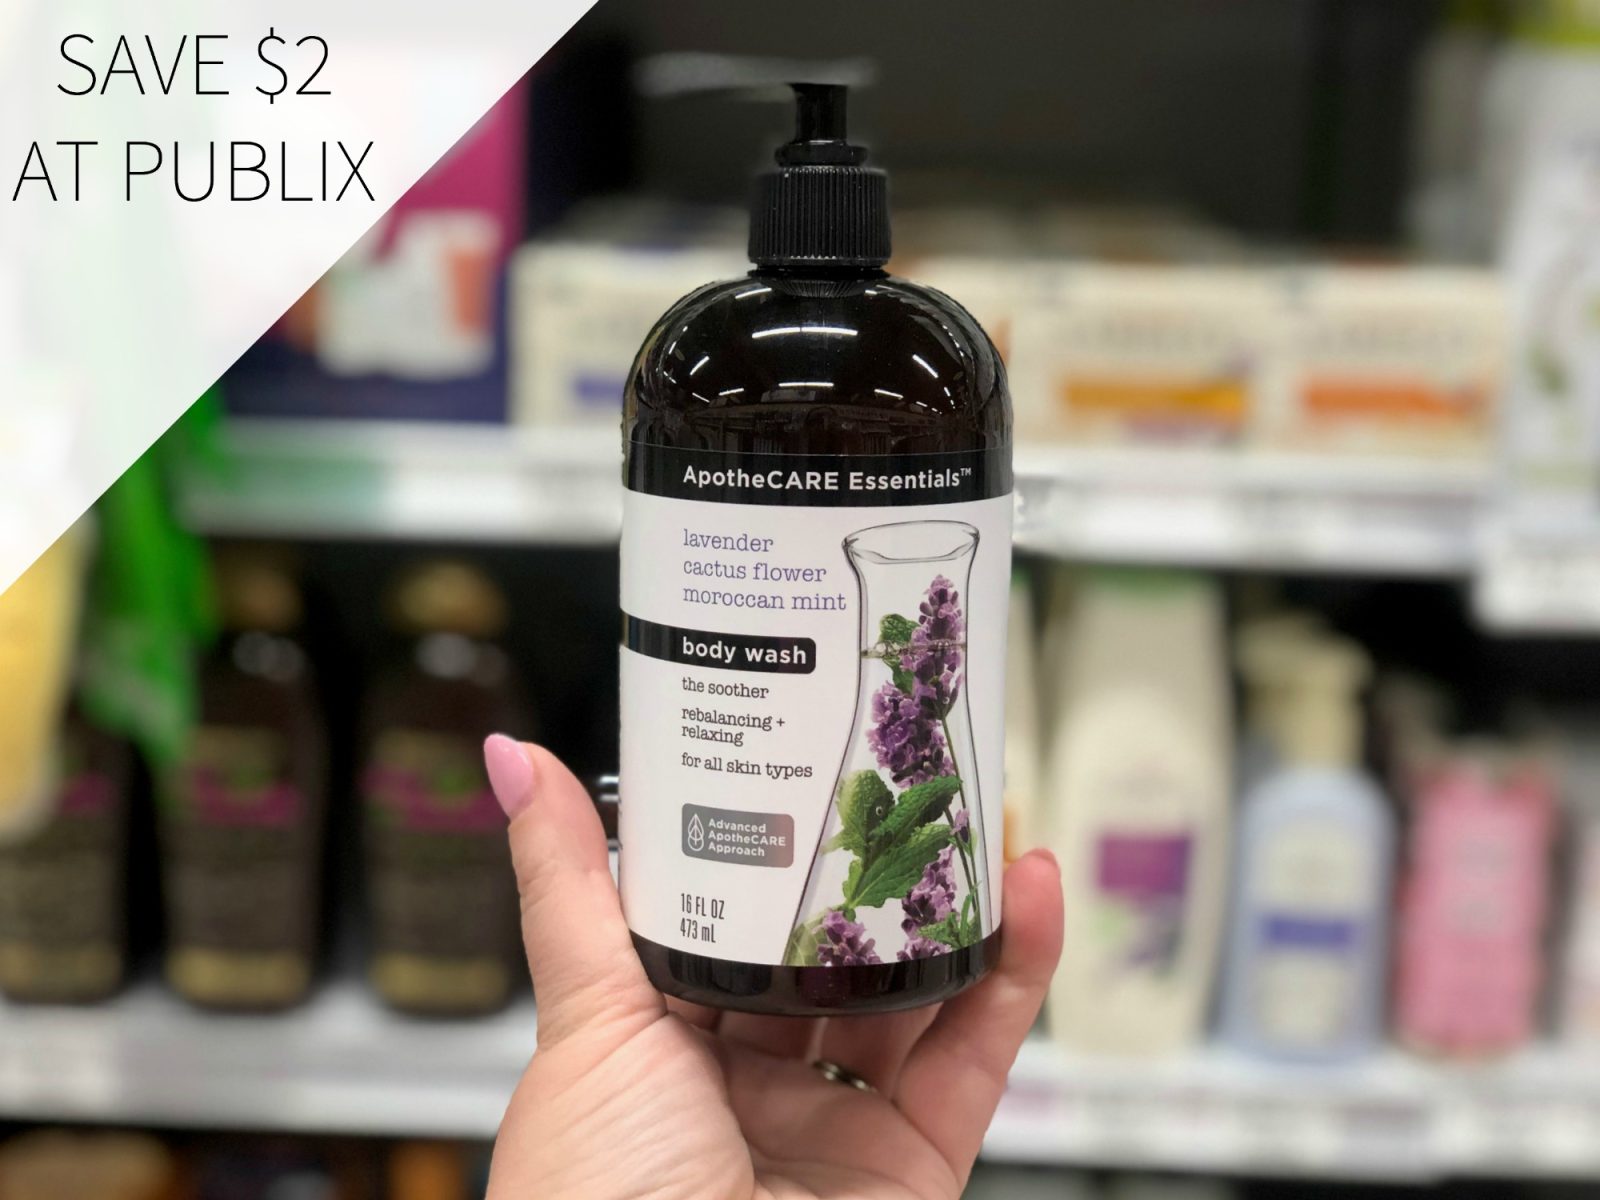 Pick Up A Super Discount On ApotheCARE “The Soother” Body Wash – Save $2 At Publix